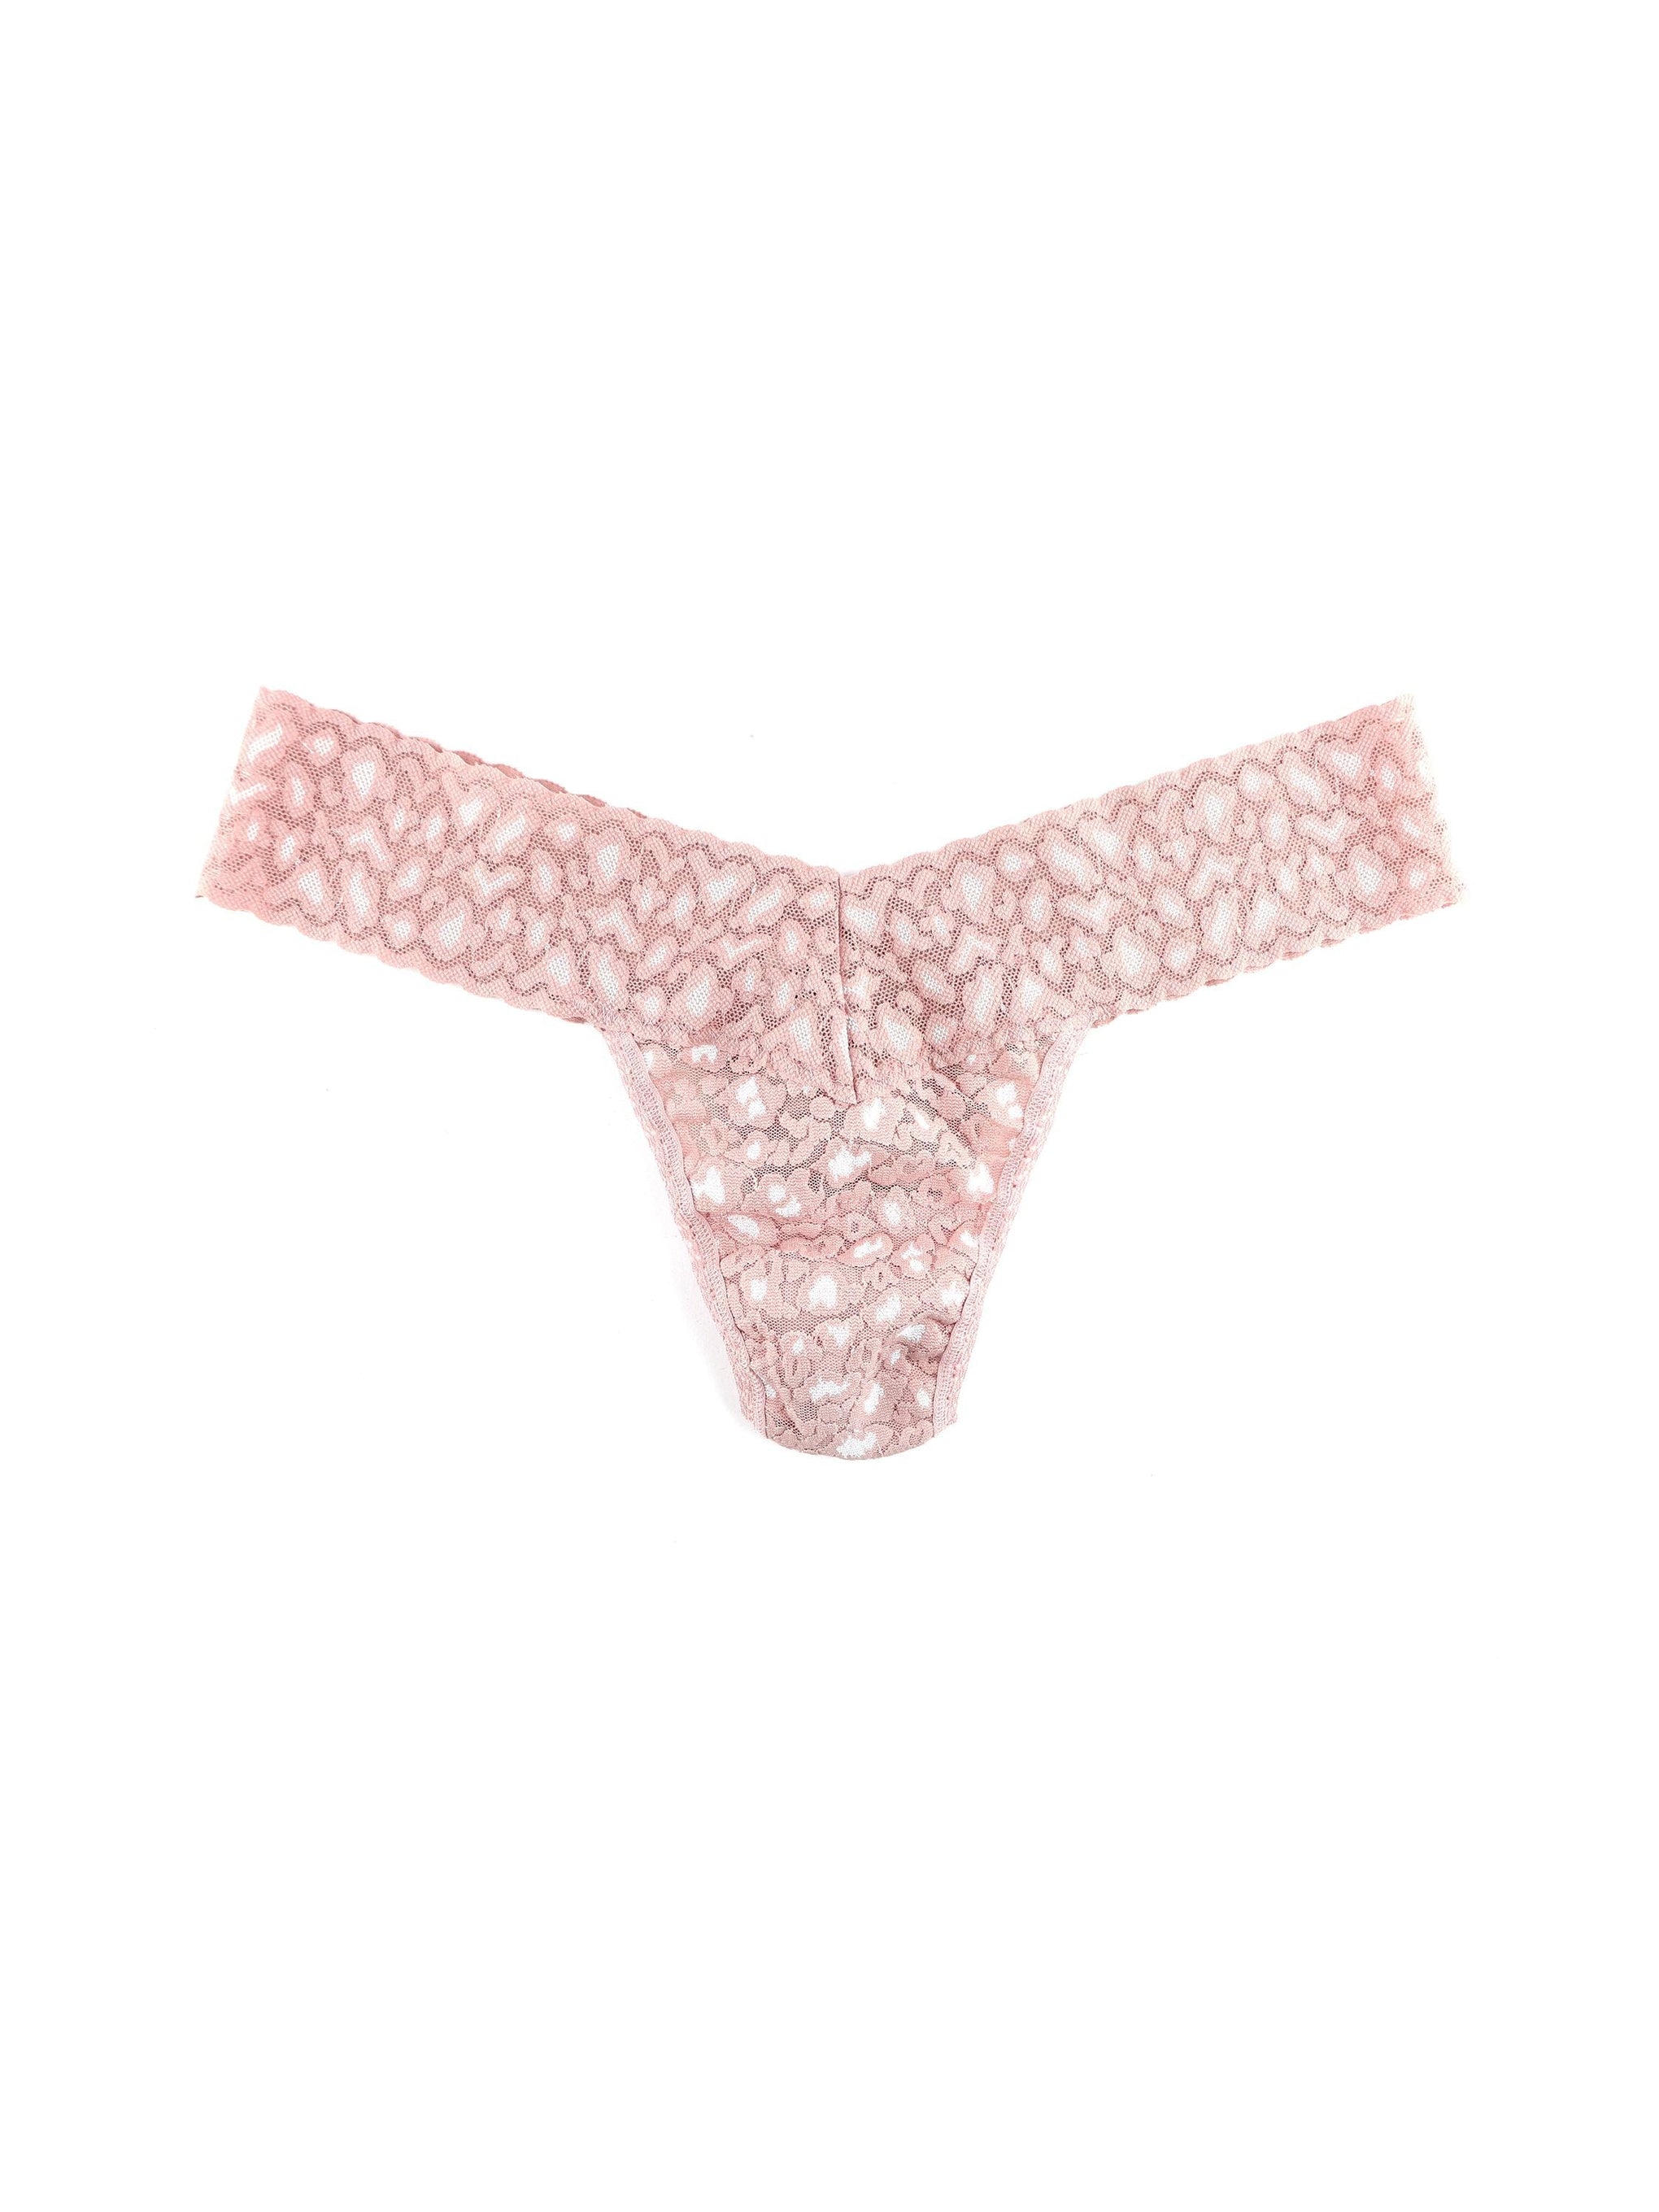 Cross-Dyed Leopard Low Rise Thong Desert Rose Pink